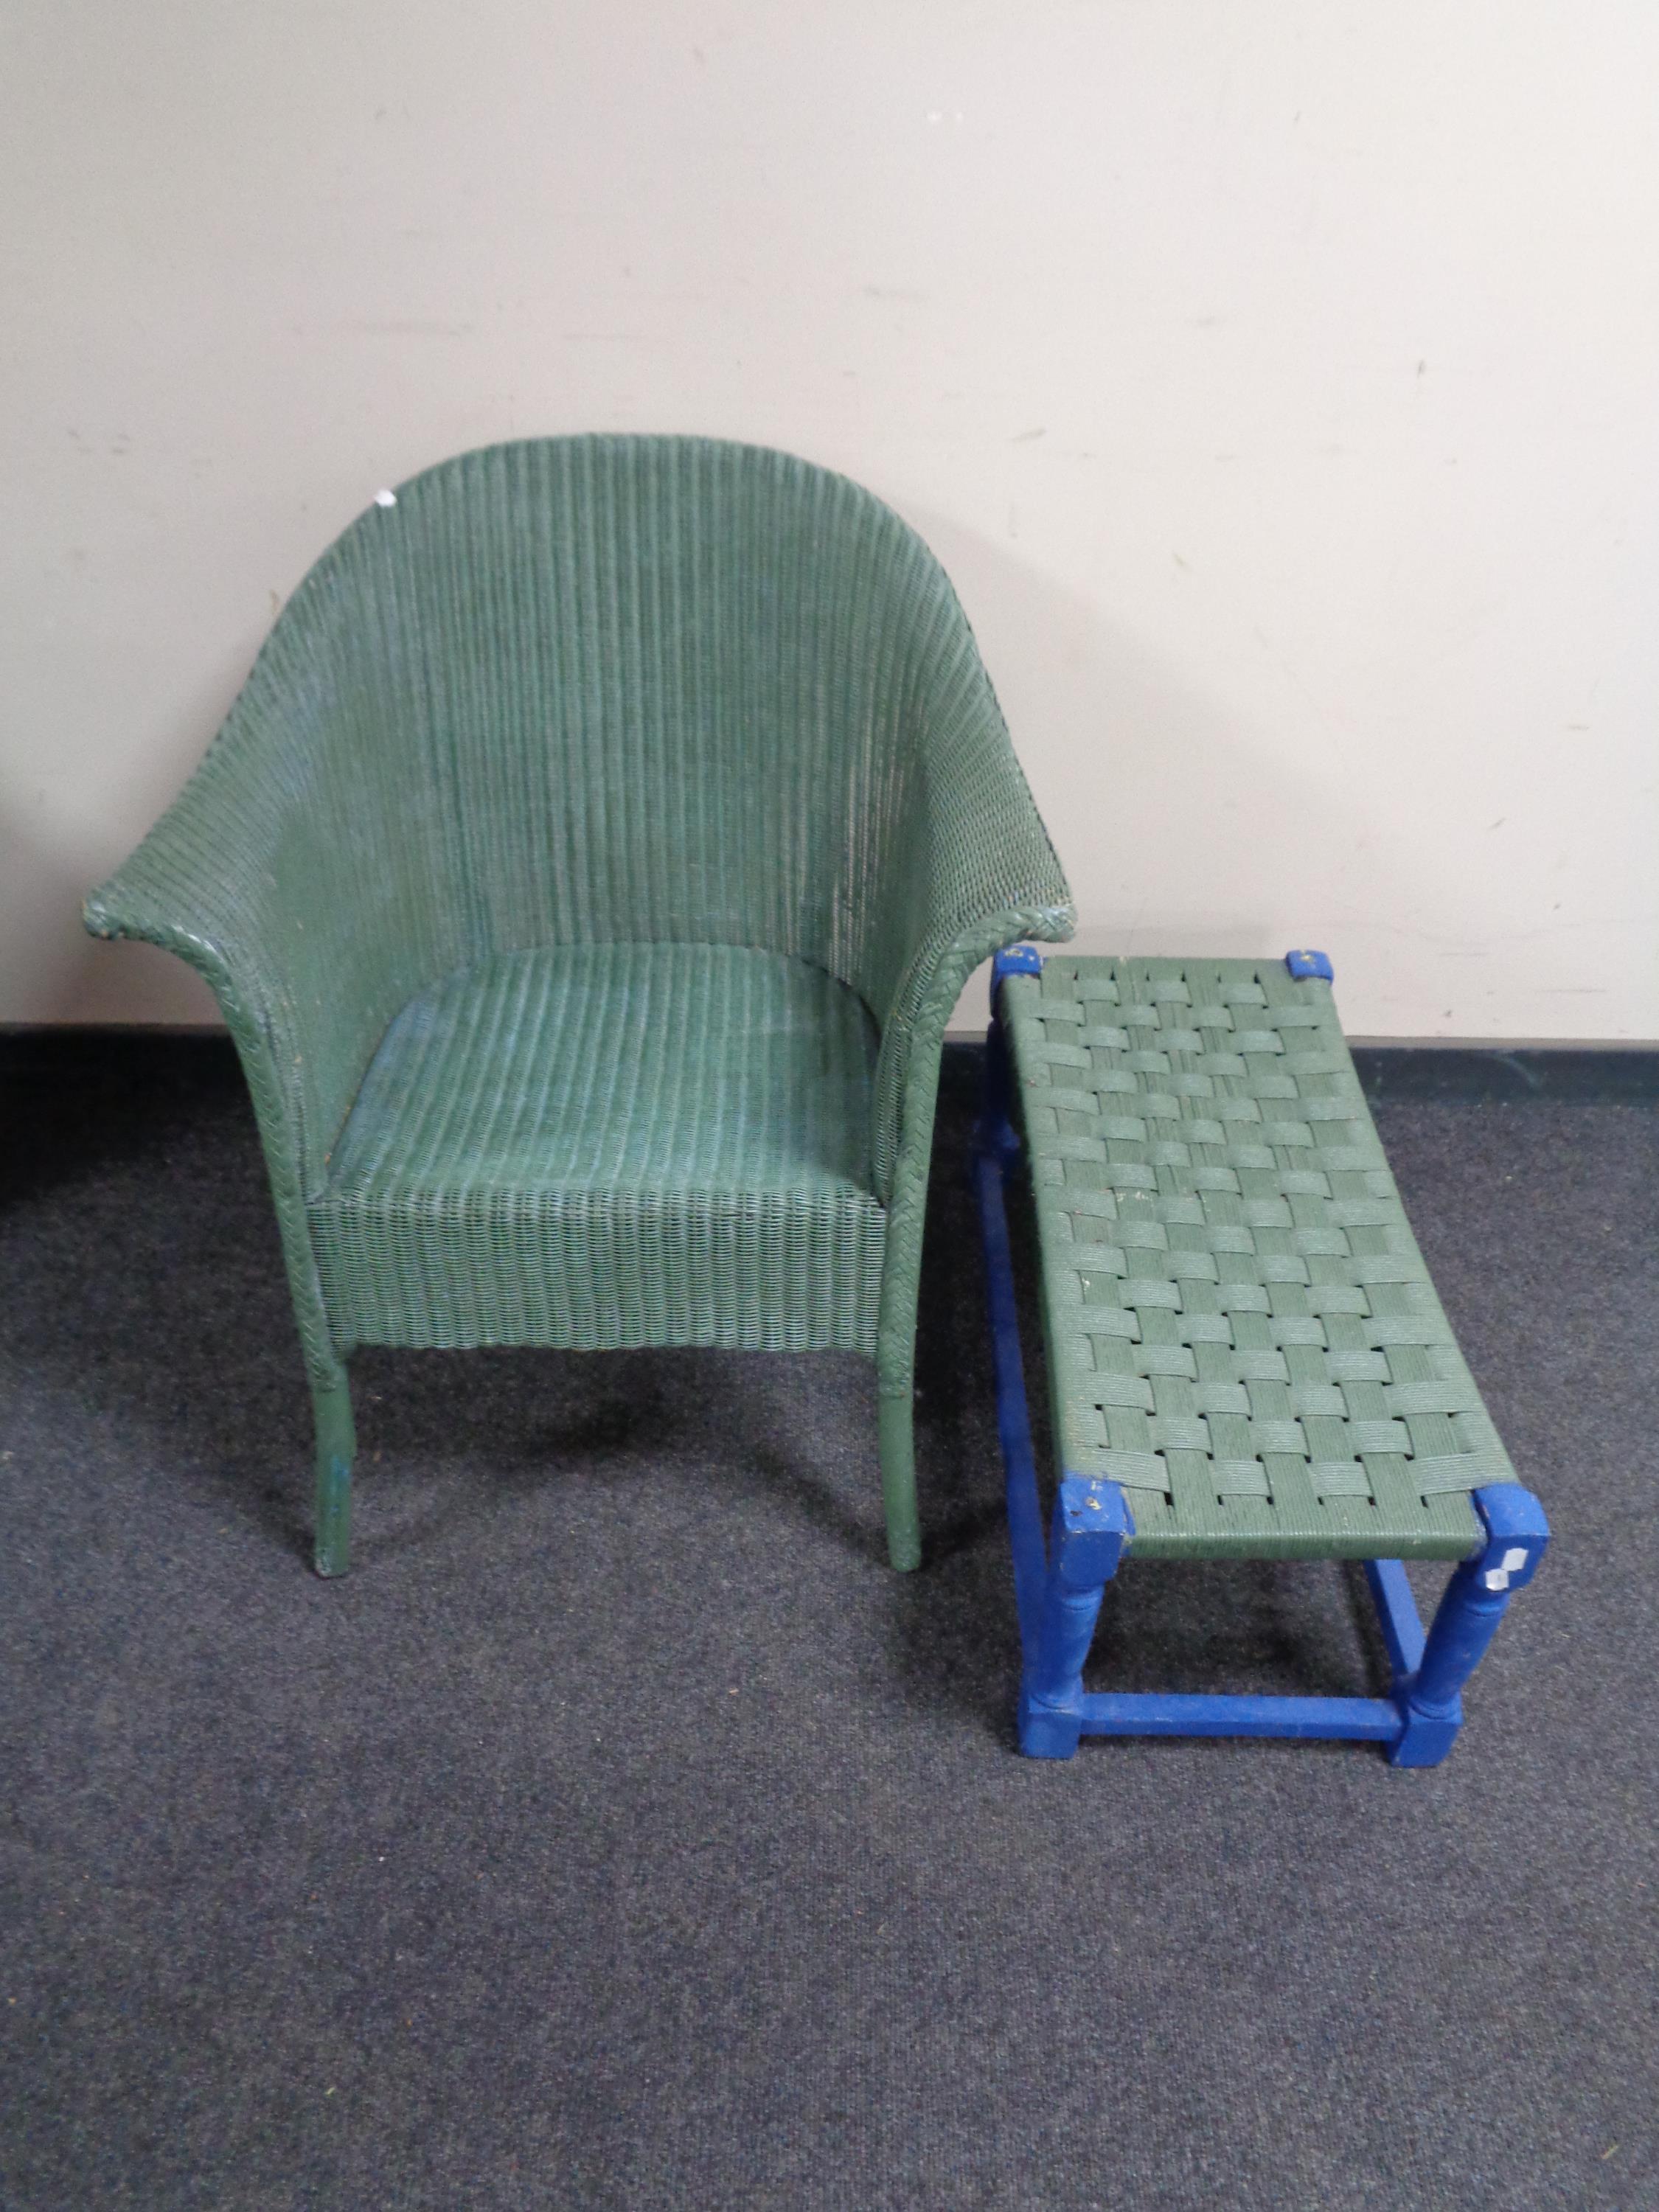 A green loom armchair together with similar painted rectangular stool